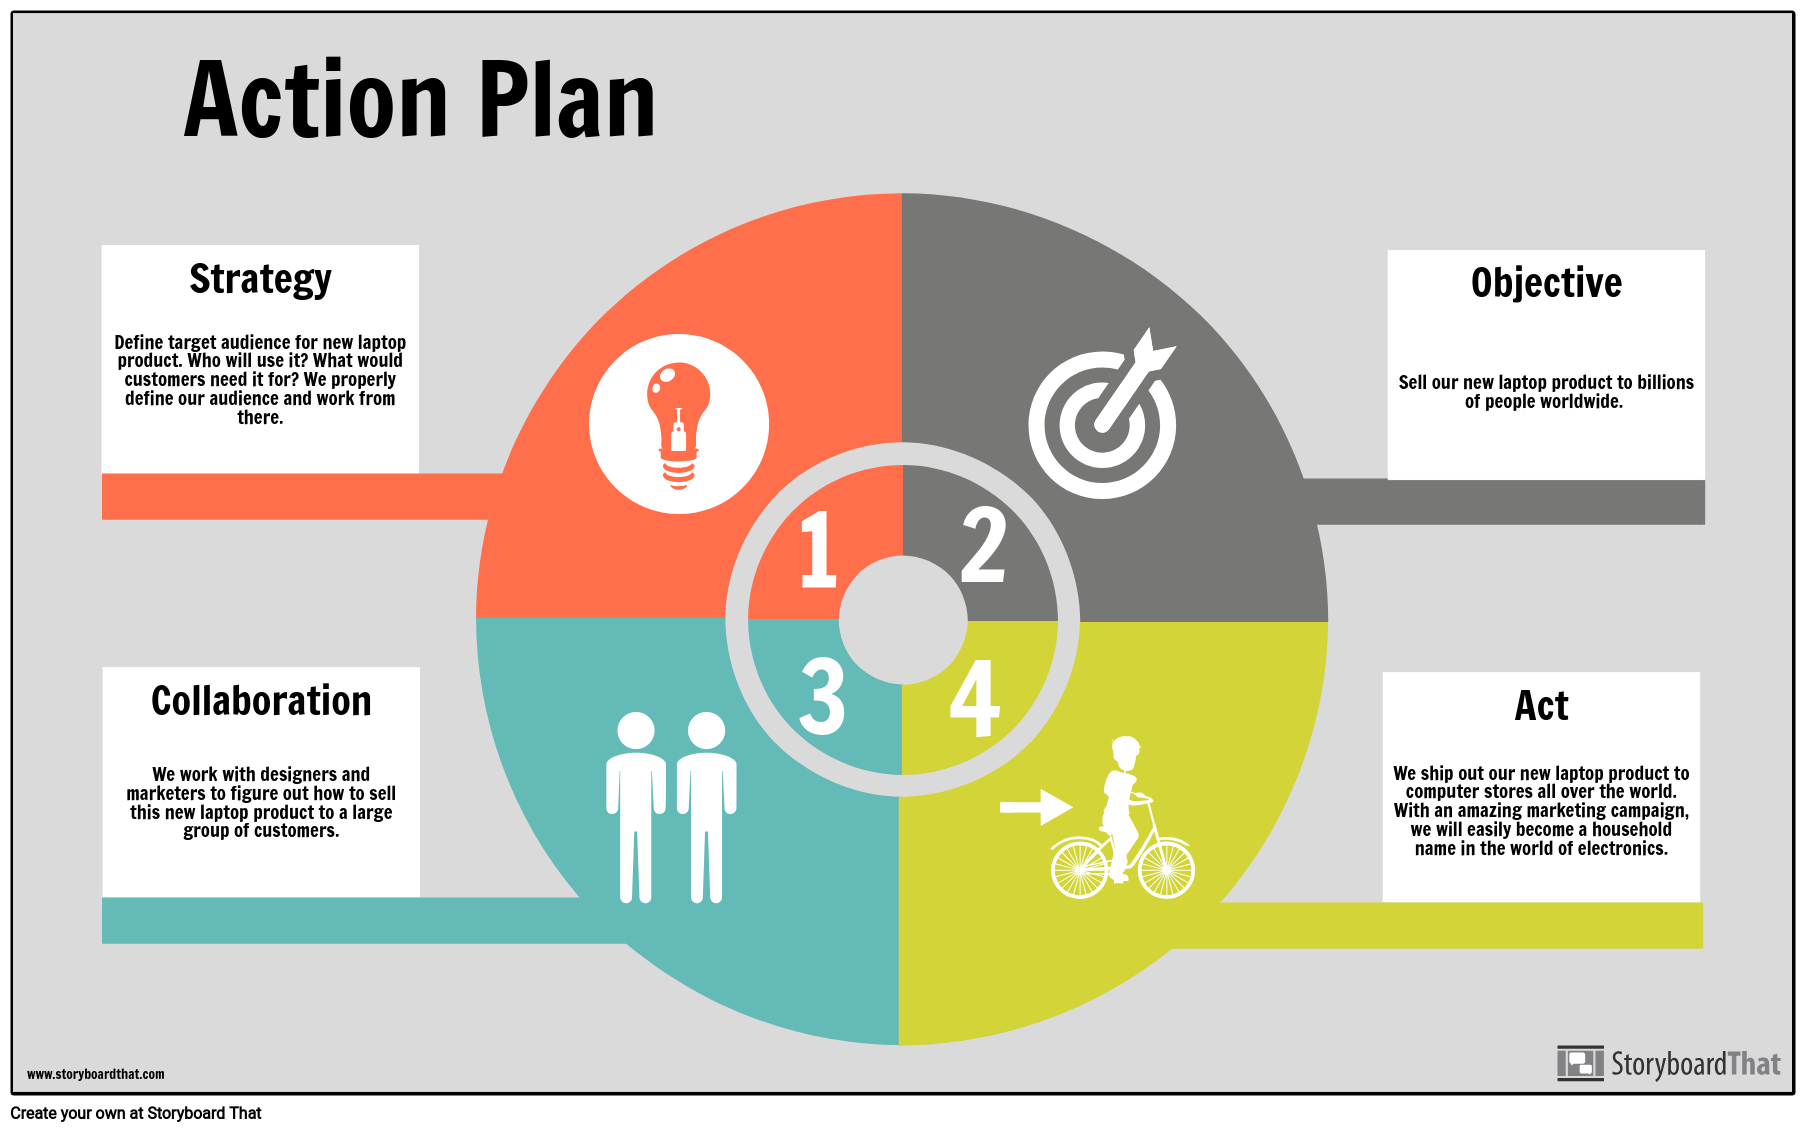 a action plan definition